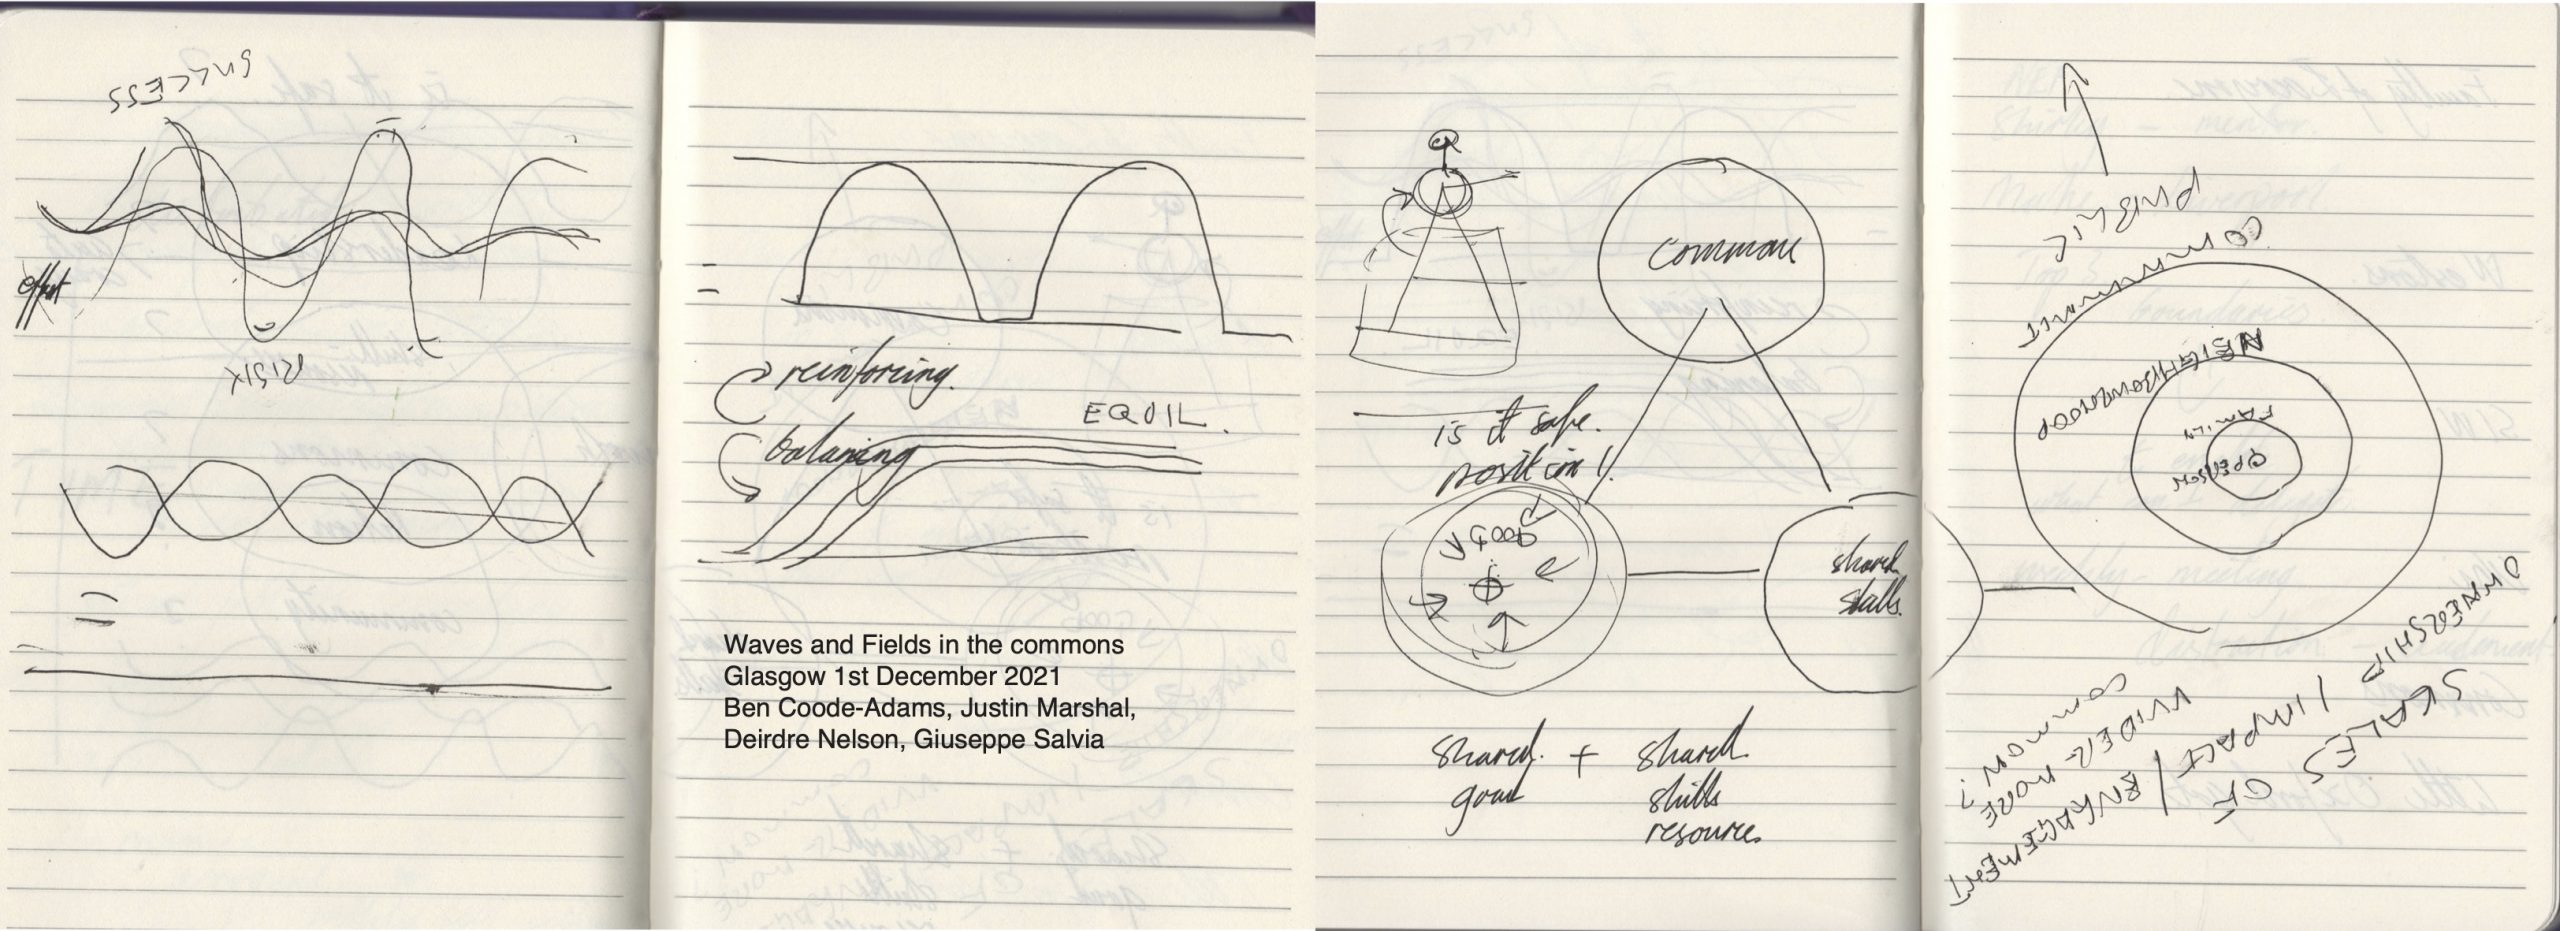 notebook pages with sketched diagrams showing curved lines and interconnected circles.